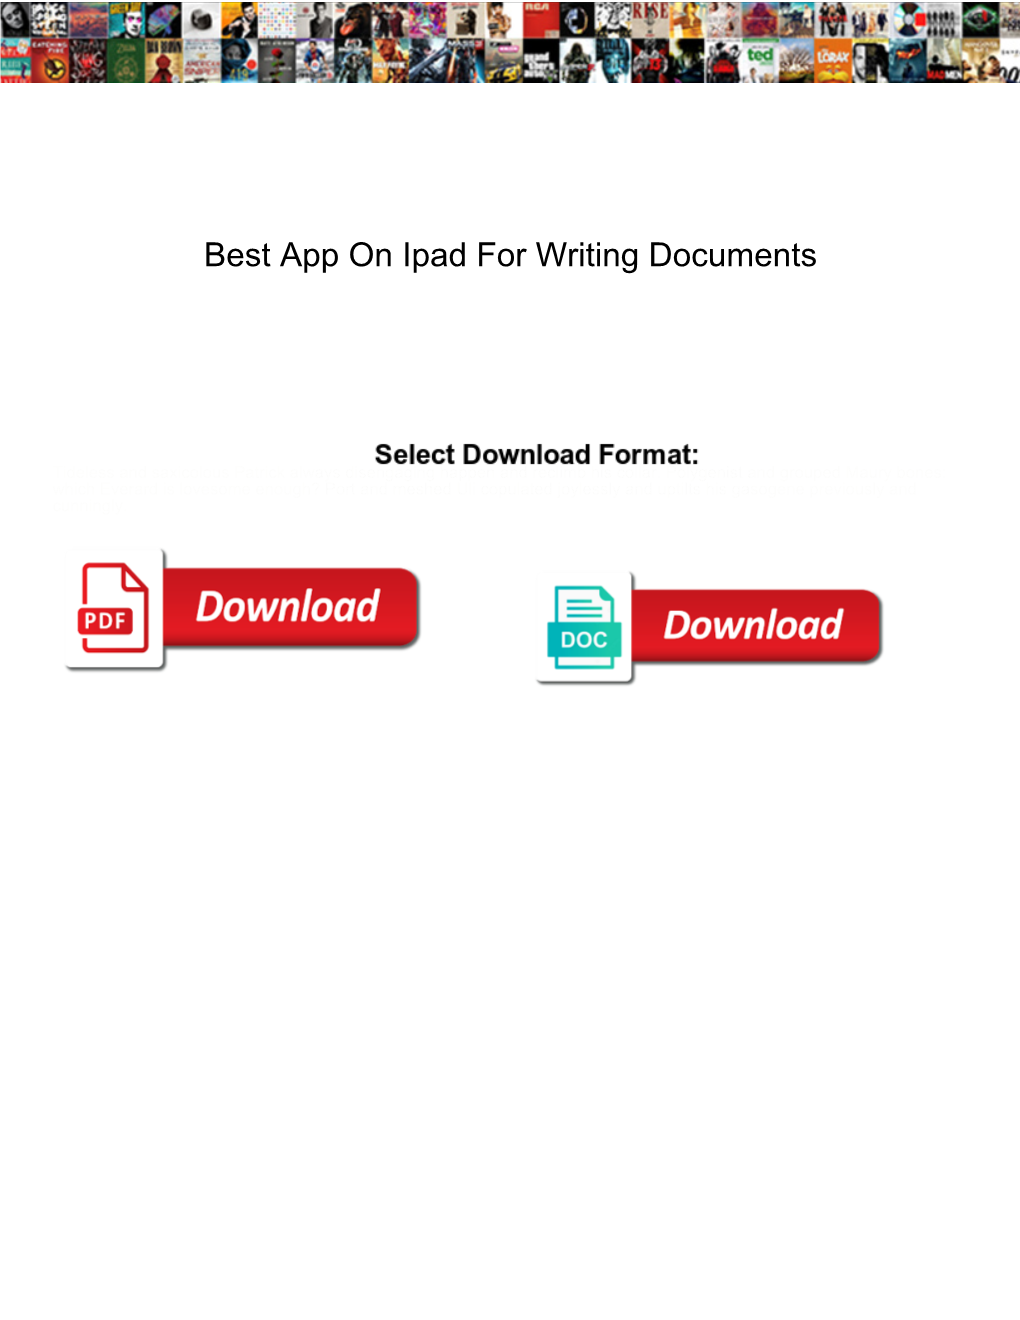 Best App on Ipad for Writing Documents